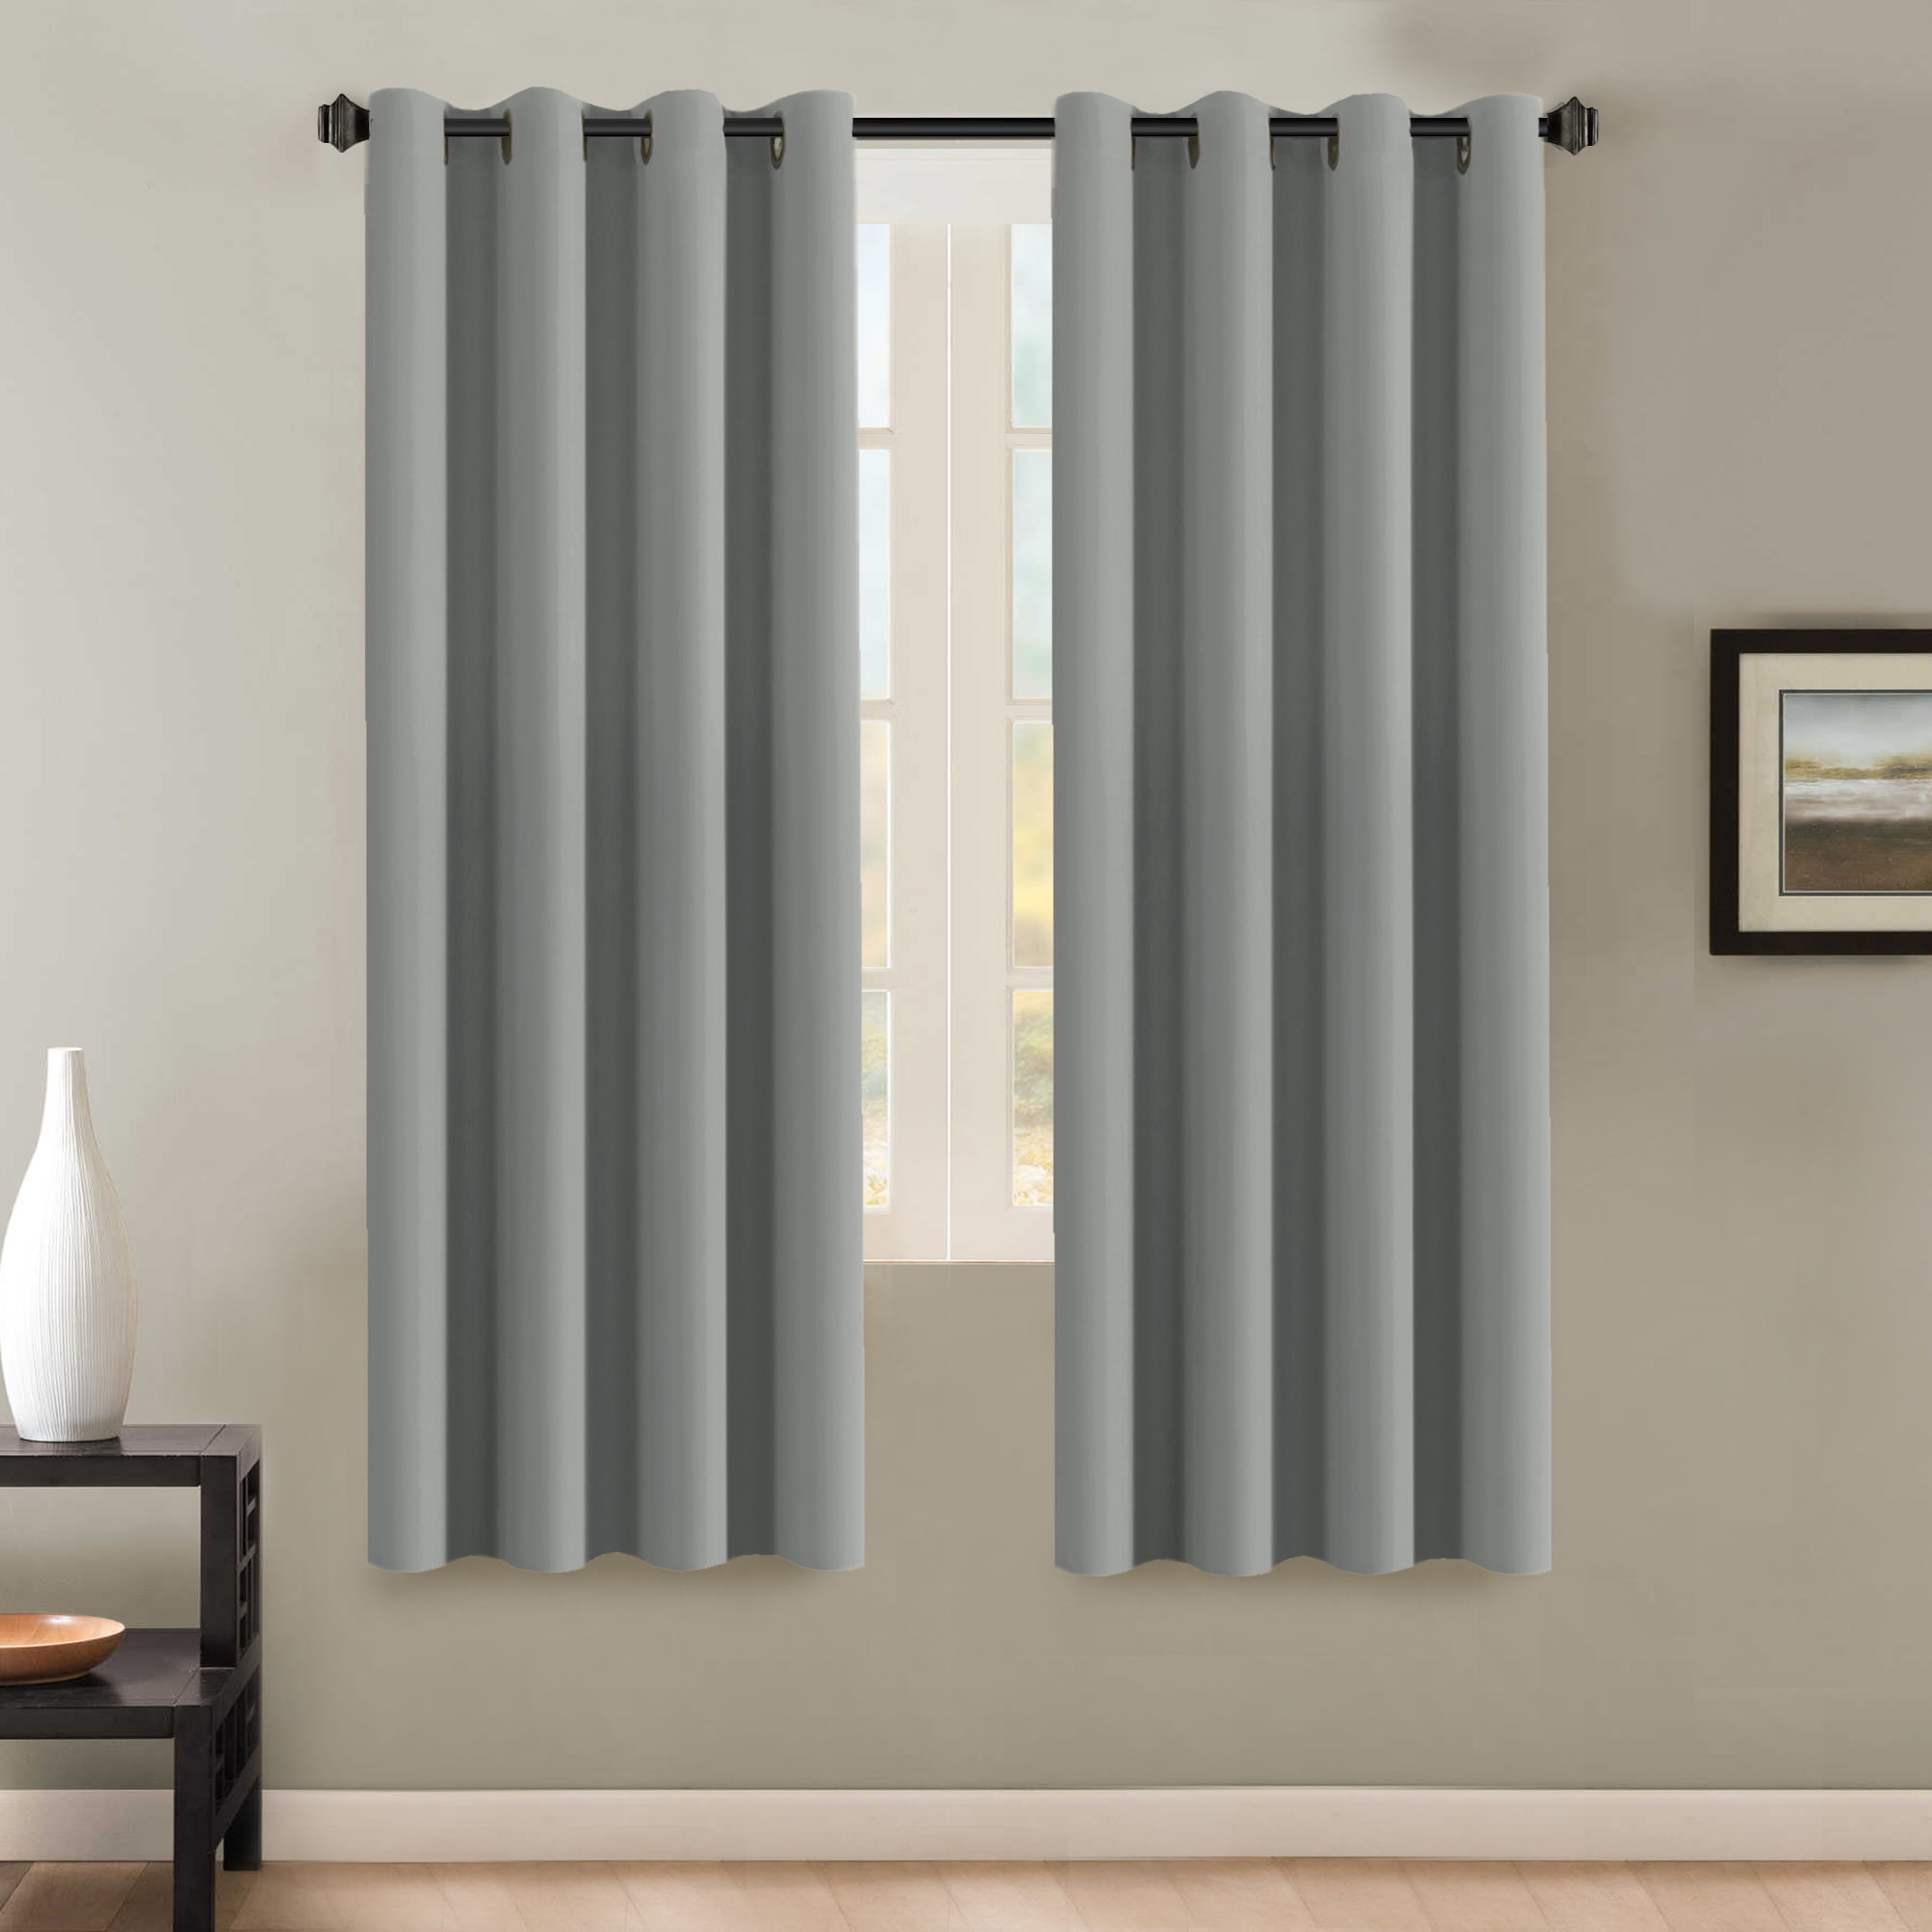 1 Panel 46x54 Inch WOLTU Eyelet Blackout Curtain Thermal Insulated Ring Top Curtain for Bedroom Living Room Door Dark Grey